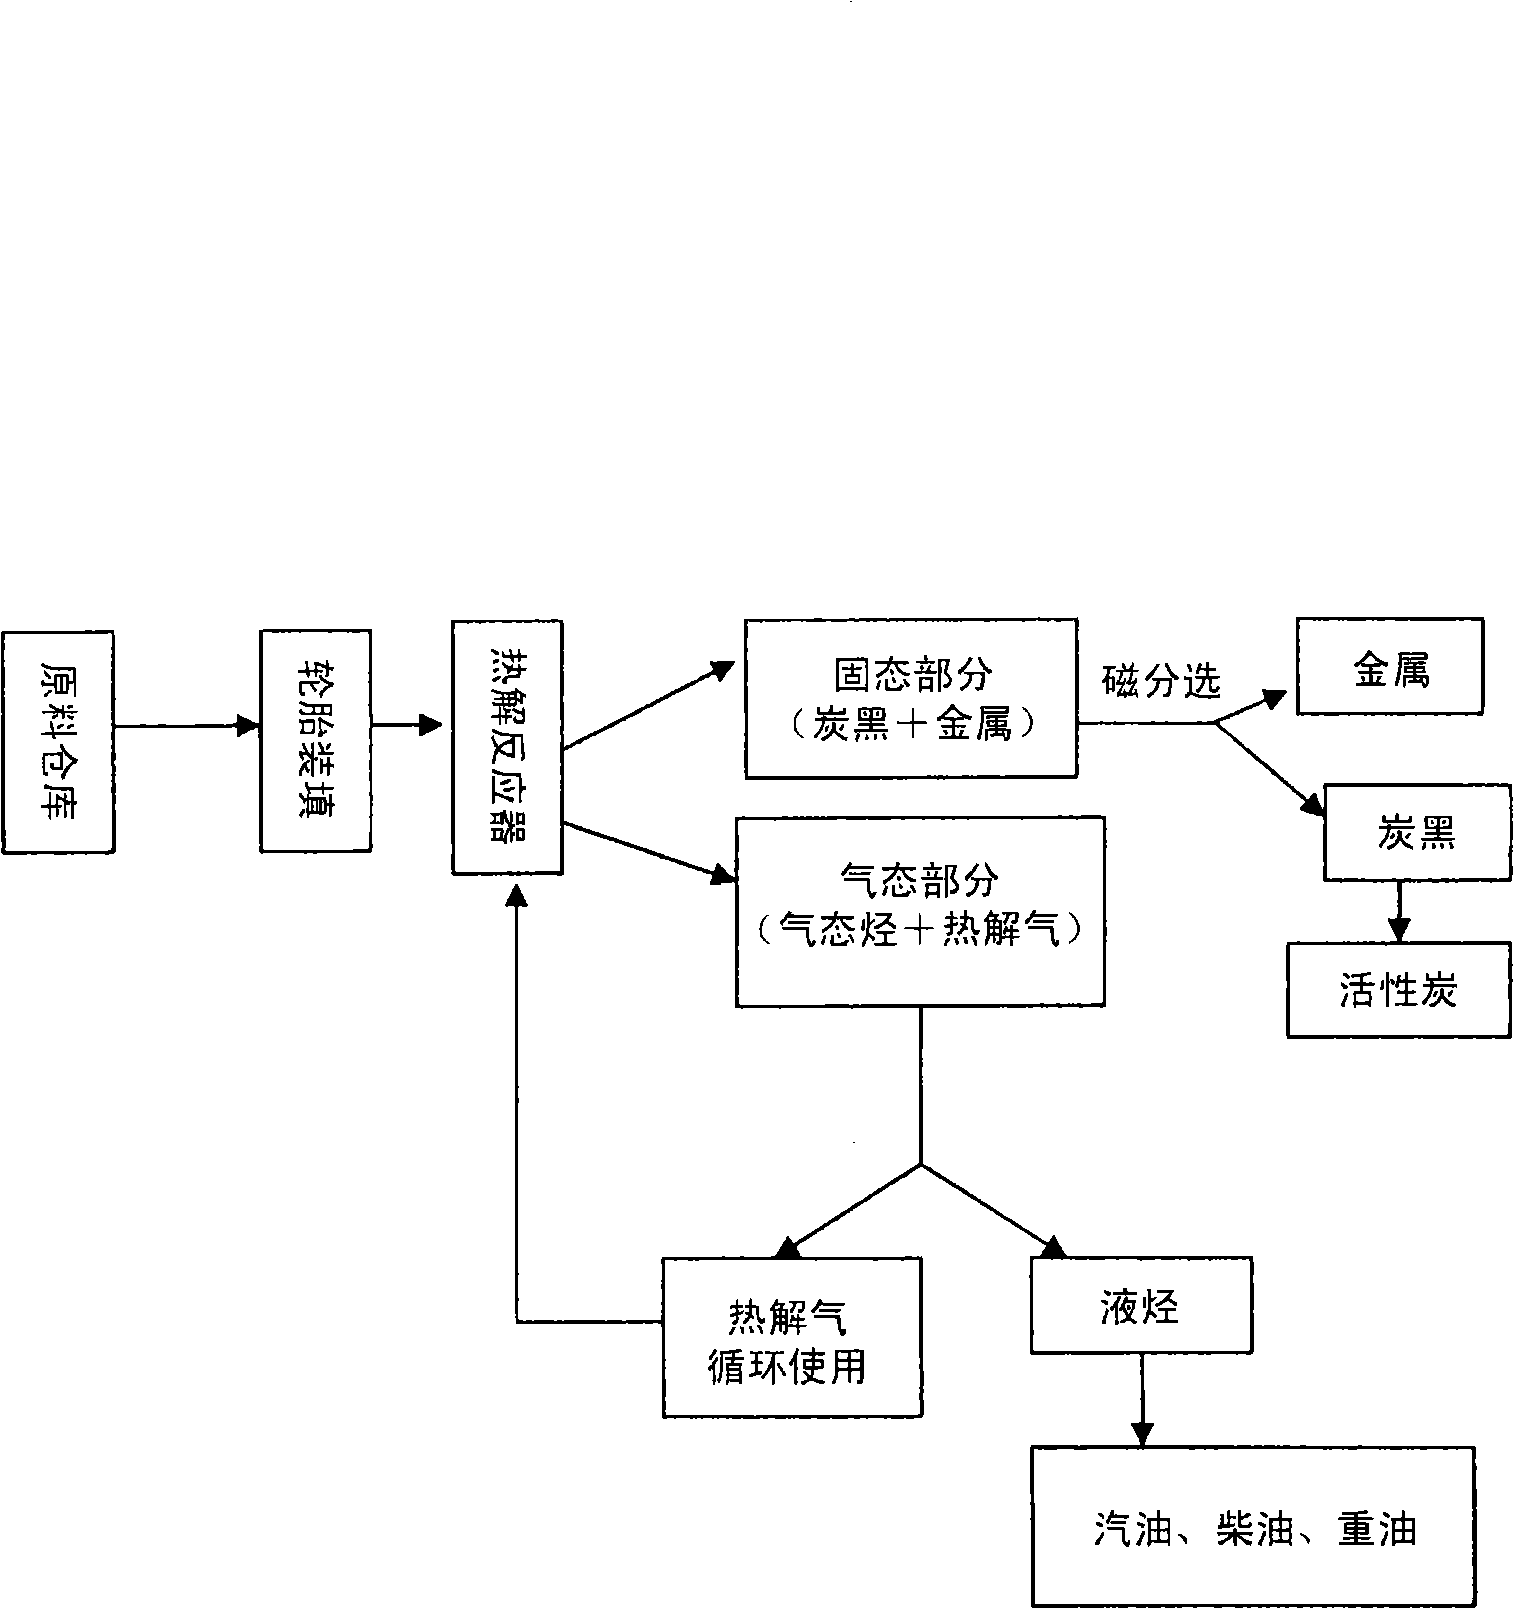 Method for treating waste tire